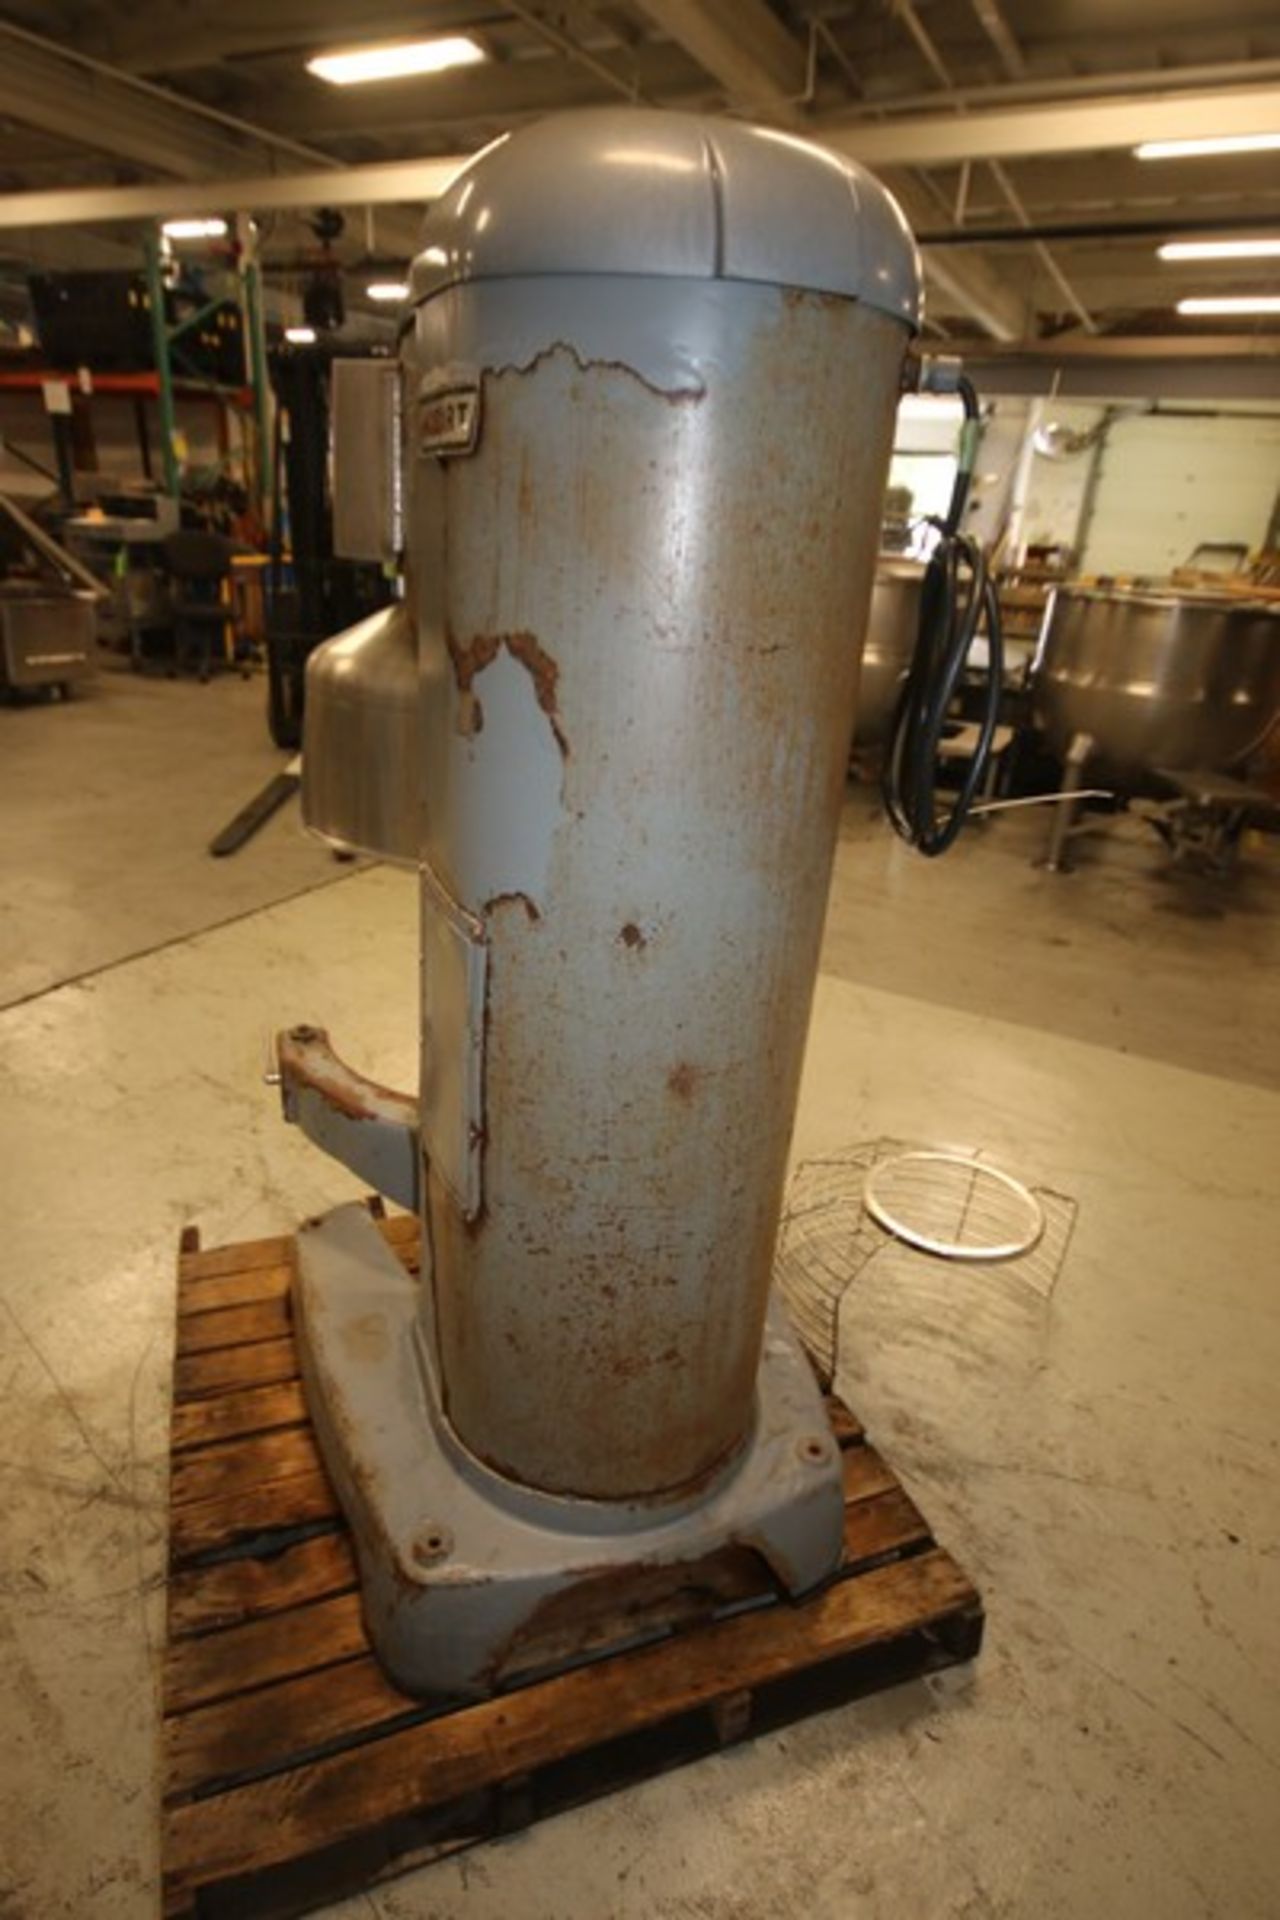 Hobart Vertical Mixer, Model H1400, SN 31-13-80-561, 200-240 3 Phase, with Digital Controls - Image 3 of 8